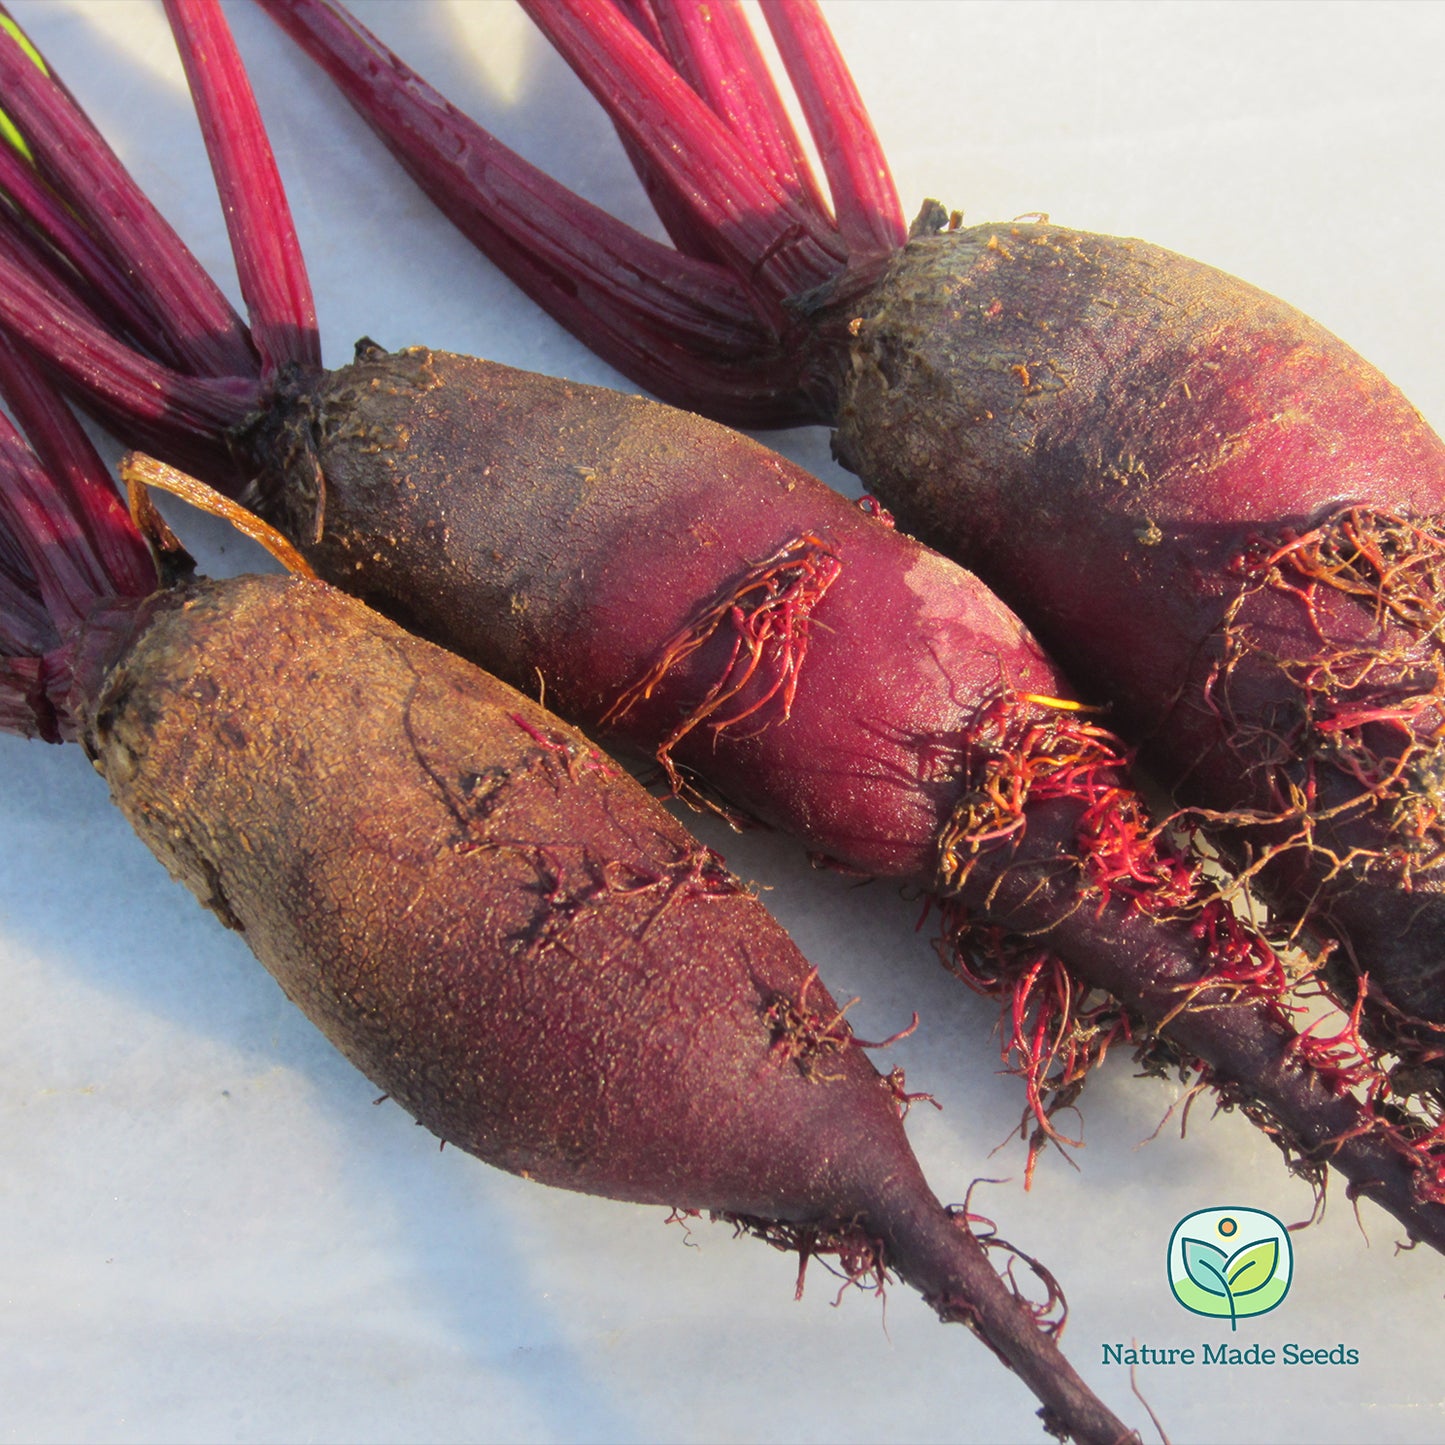 Best of Beets Mix Heirloom Non-GMO Seeds Collection